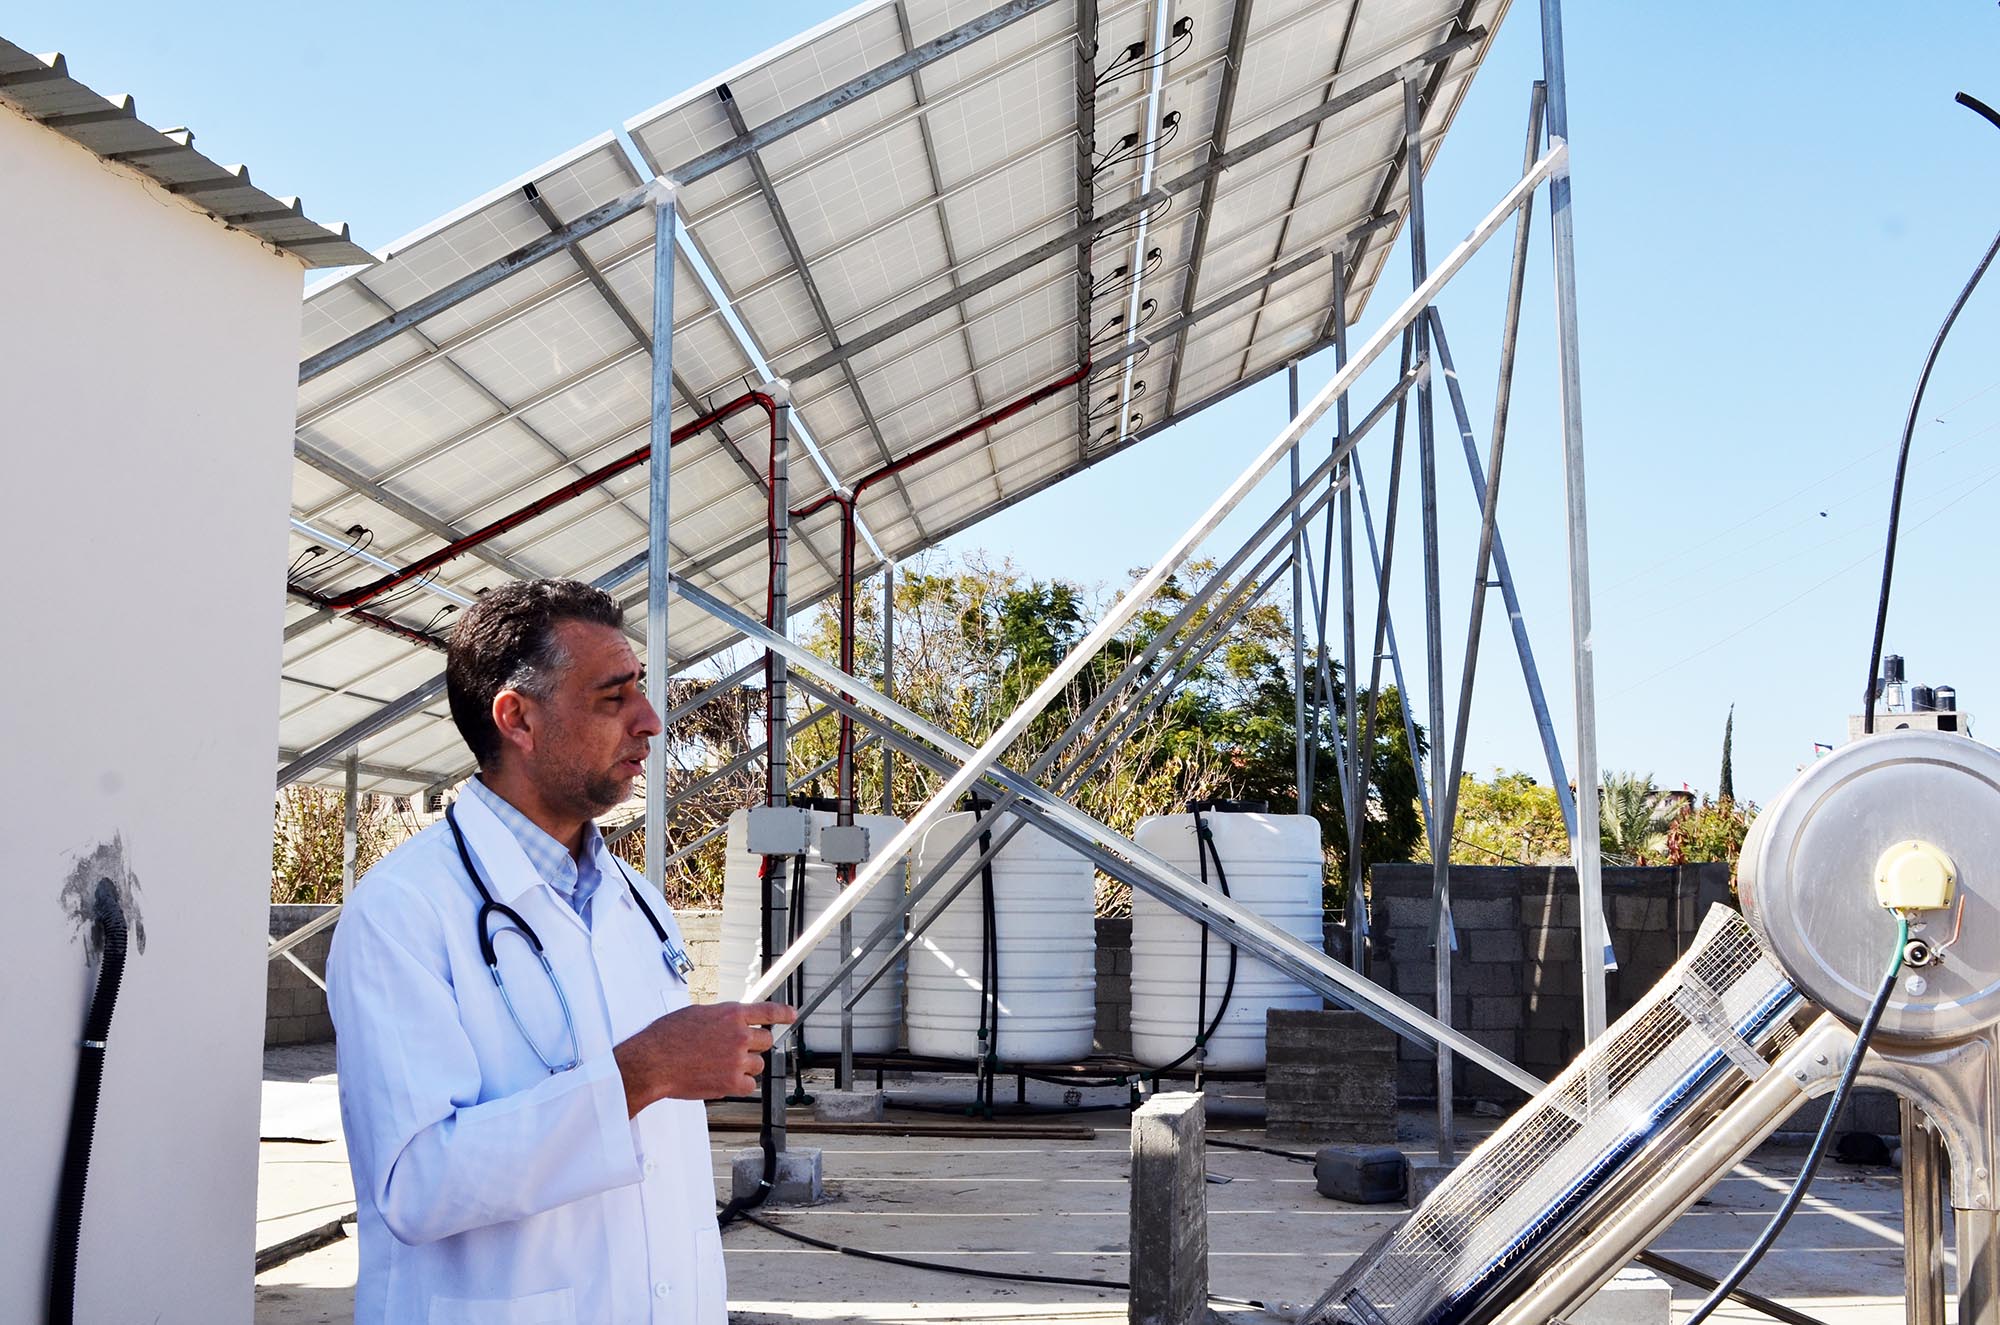 Dr. Humeida shows us the solar panels up on the roof of the clinic in Beit Lahia.